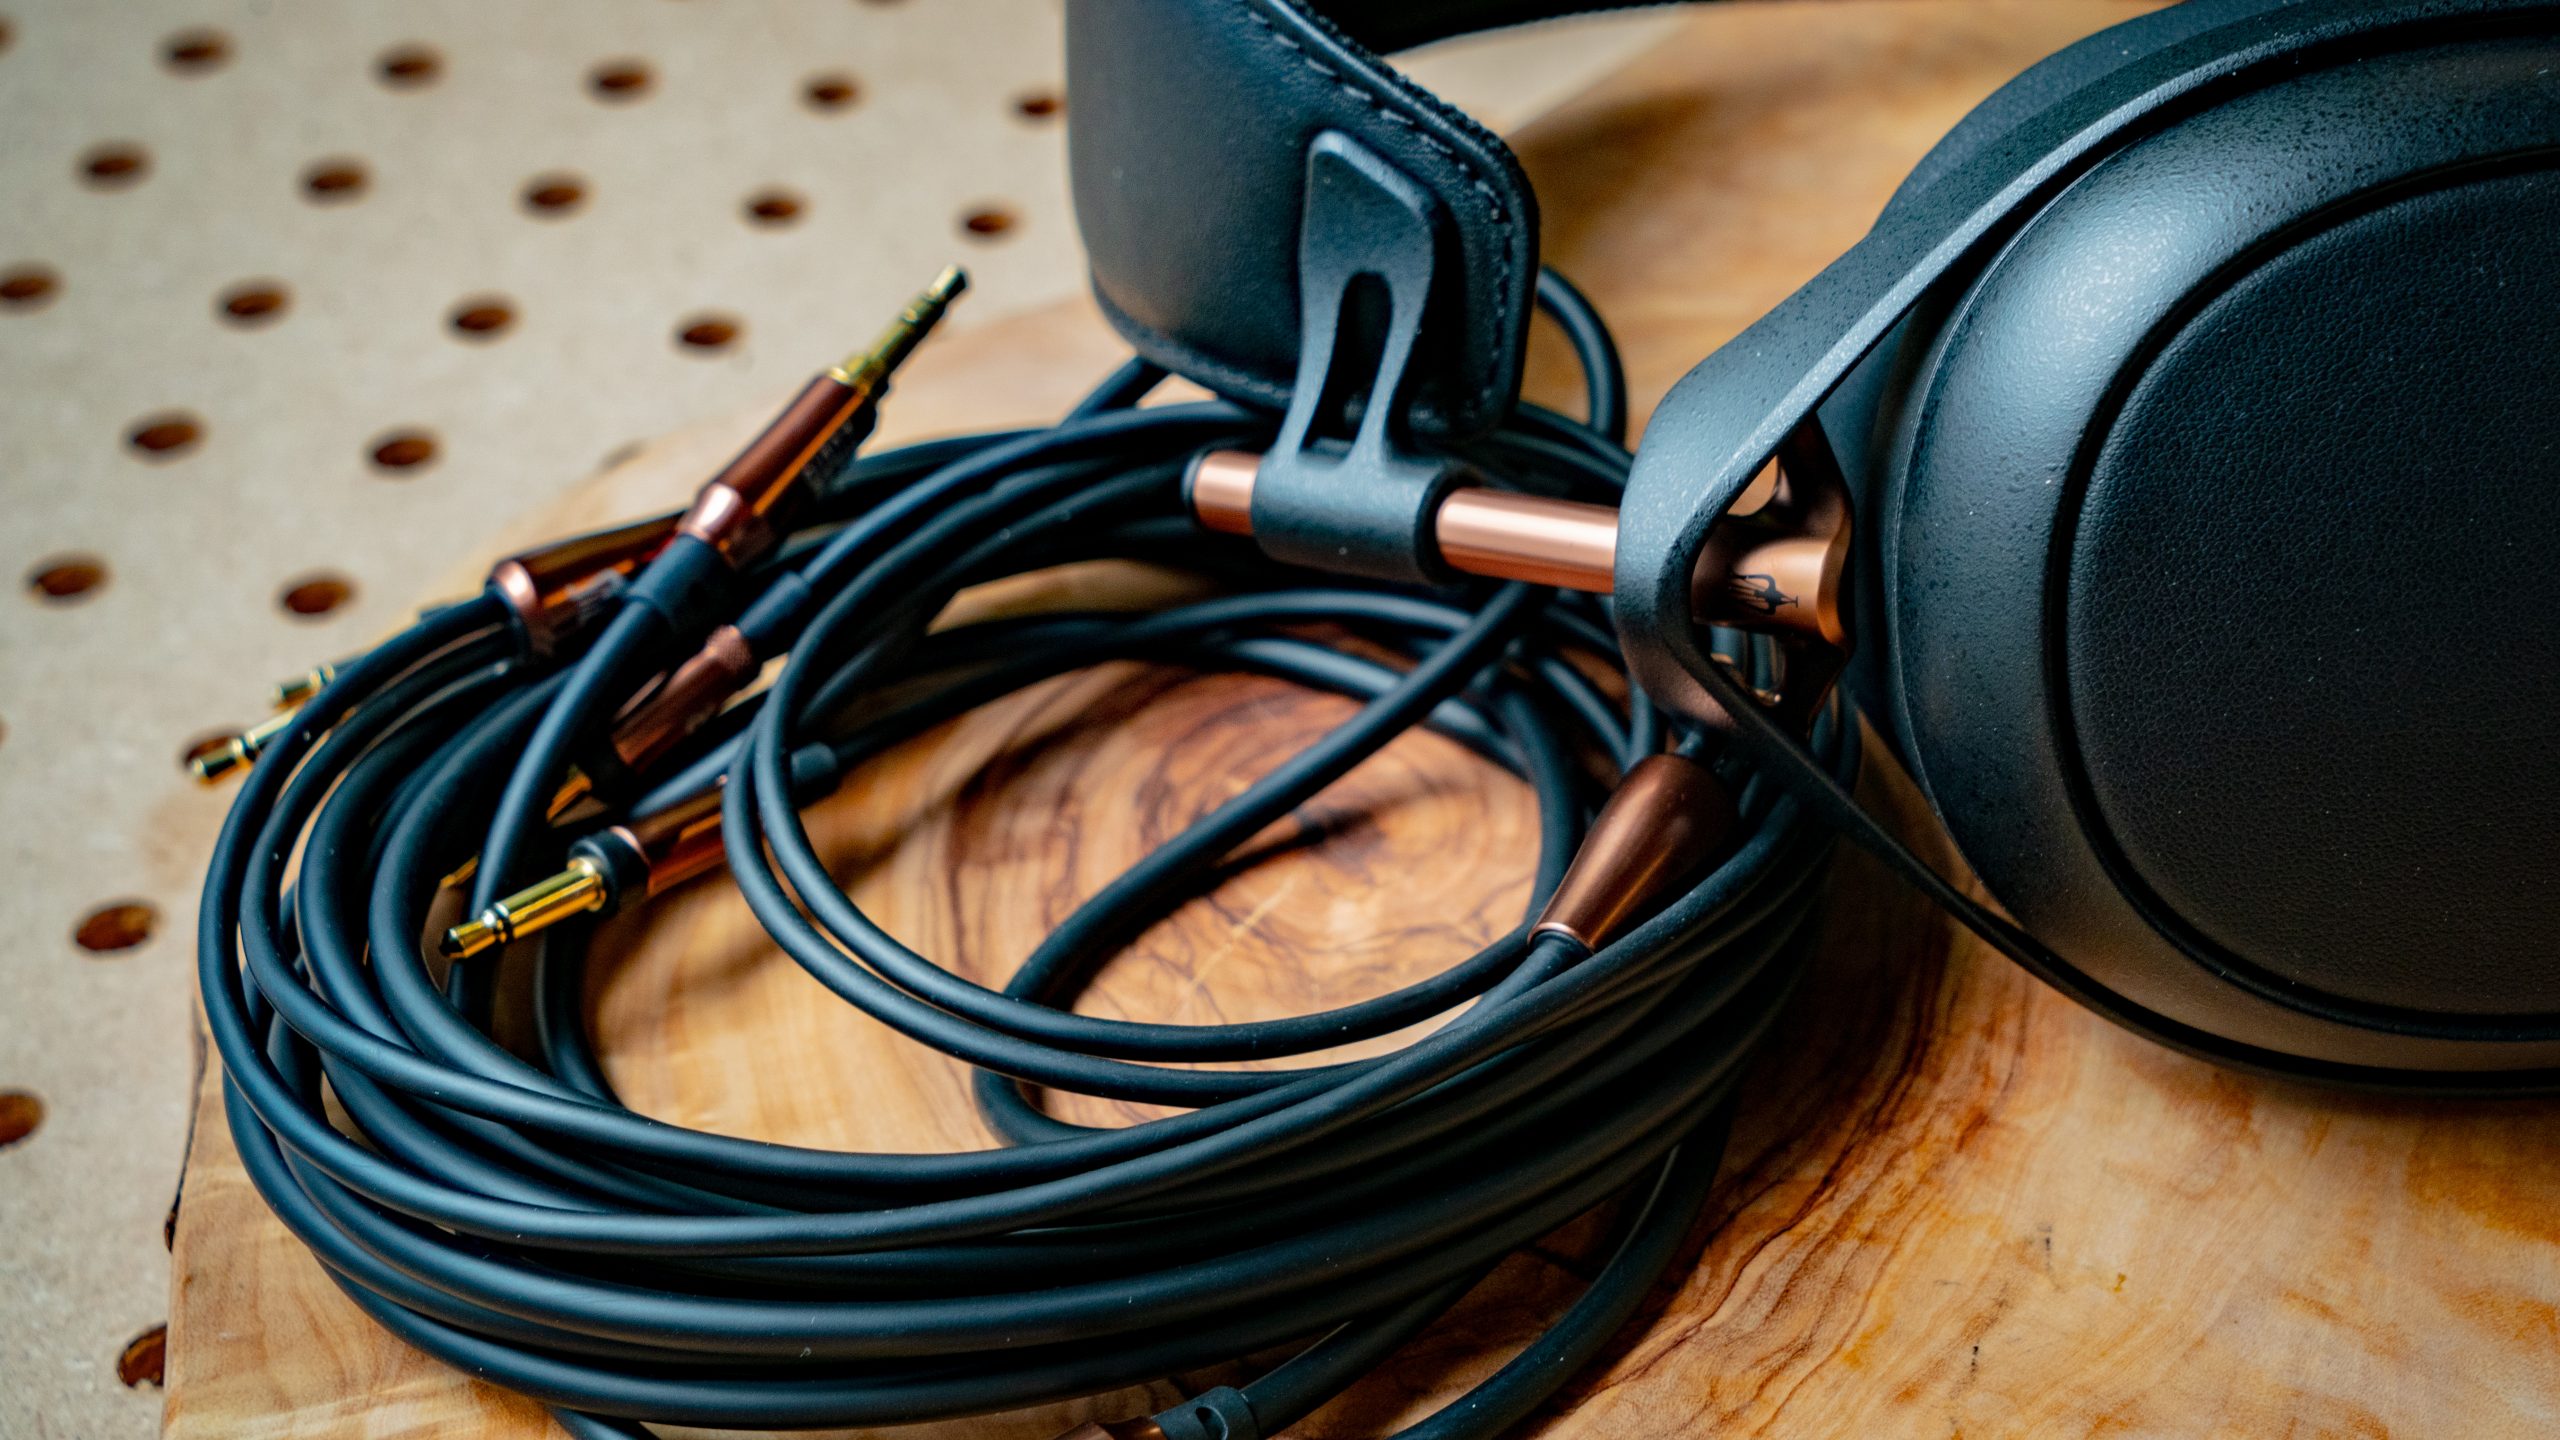 A photo of the Meze Audio Liric's cable and band.